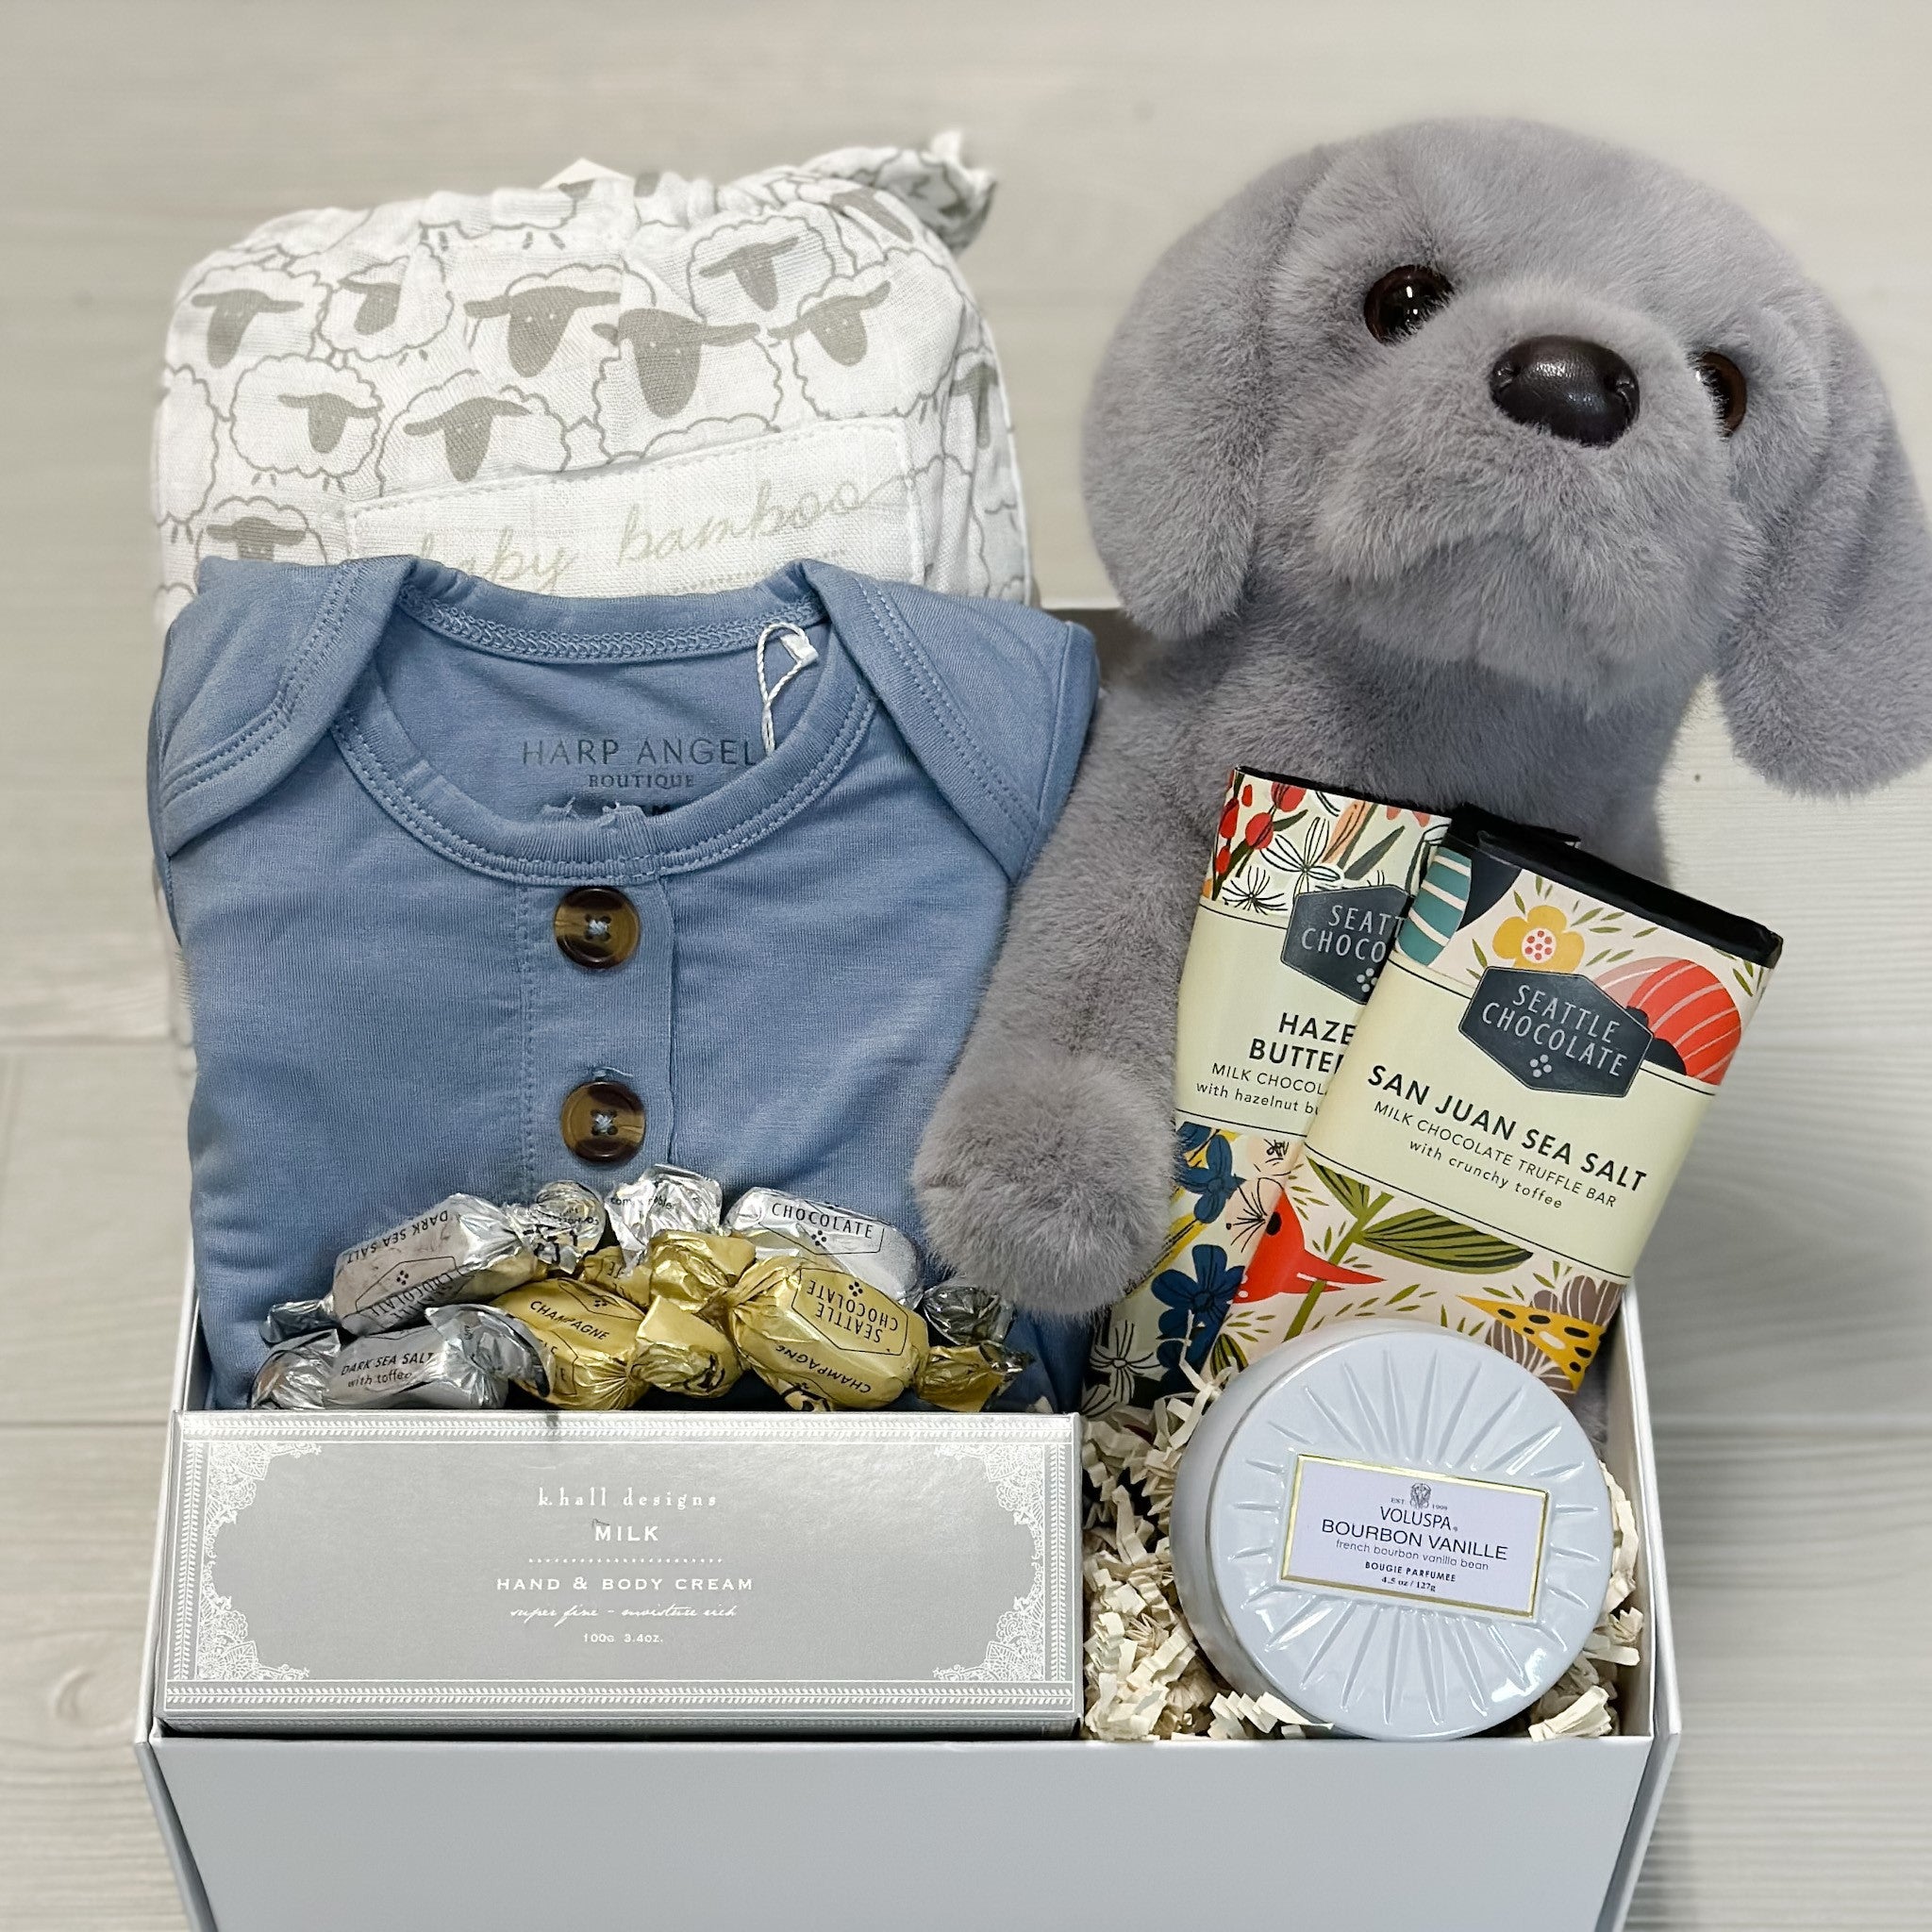 swaddle blanket, gown, stuffed dog, hand cream, candle, chocolate all collected in our snips & snails & puppy dog tails gift basket.